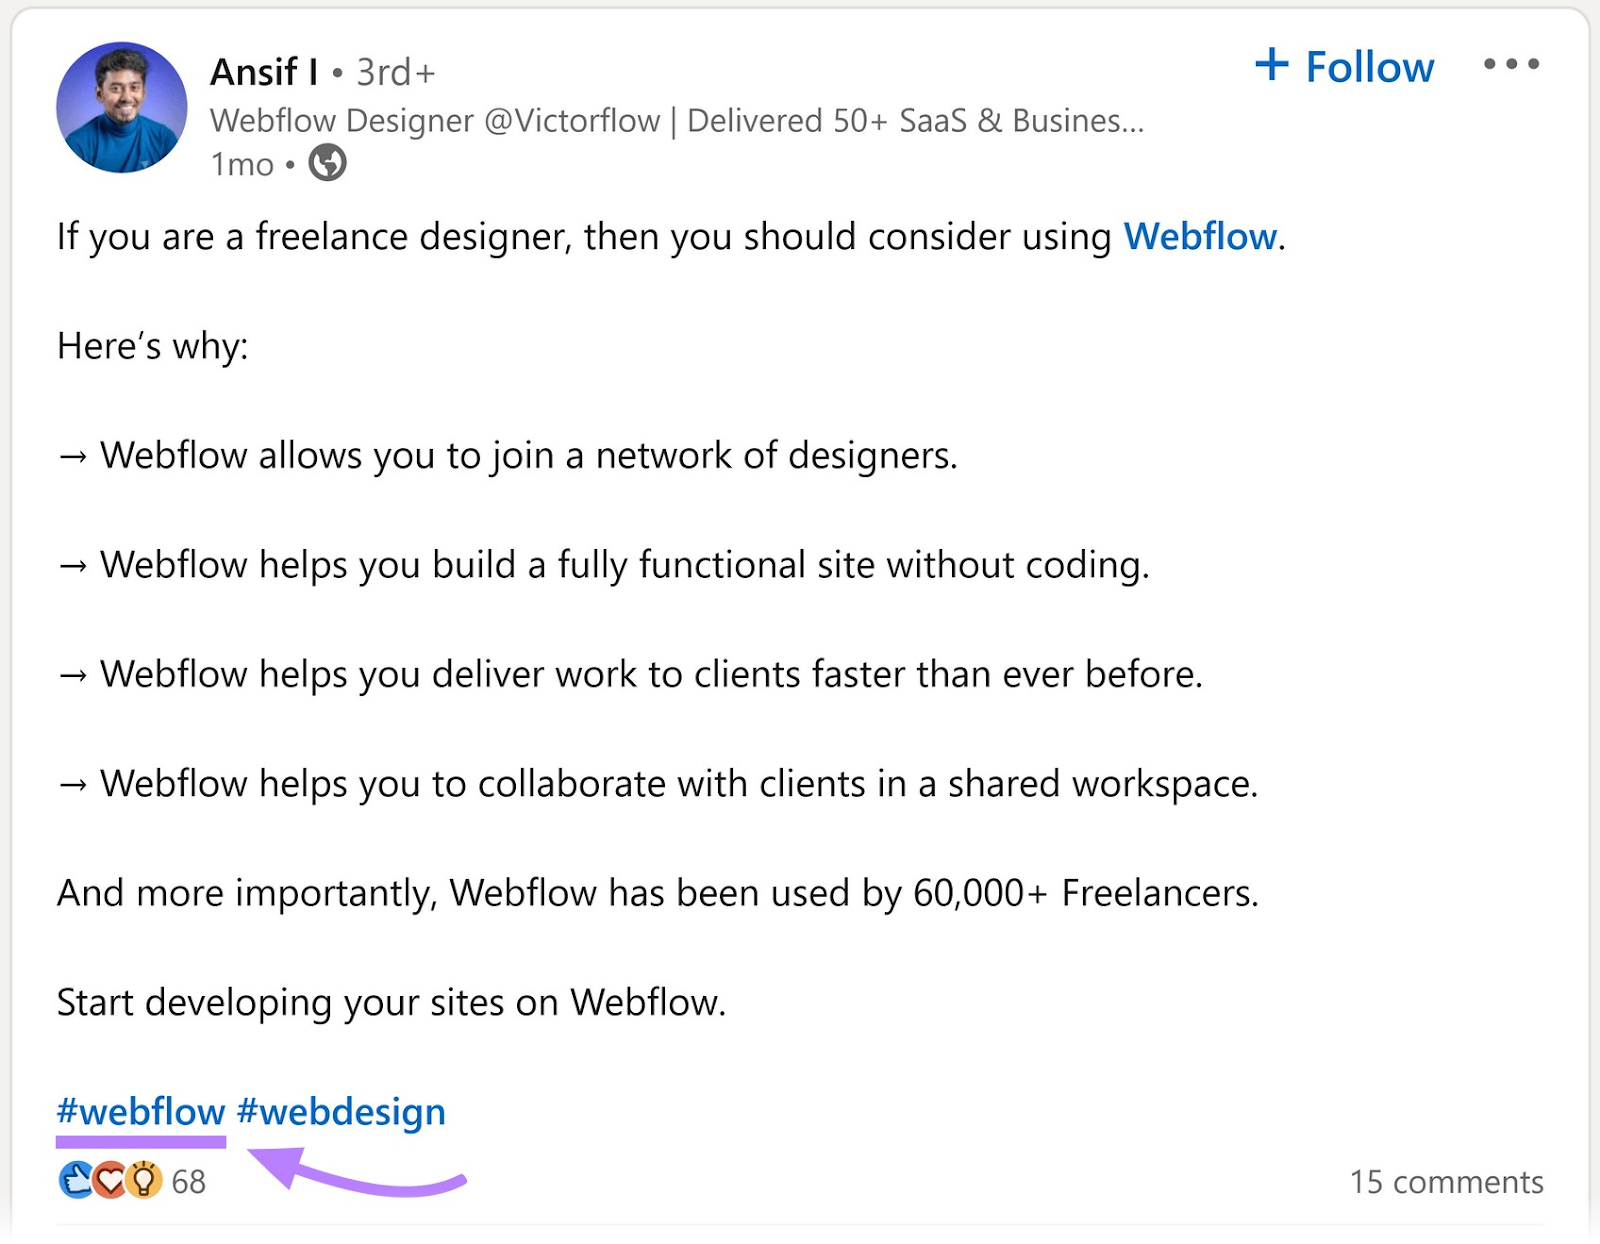 an example of a LinkedIn post with Webflow’s ،nded hashtag (#webflow)